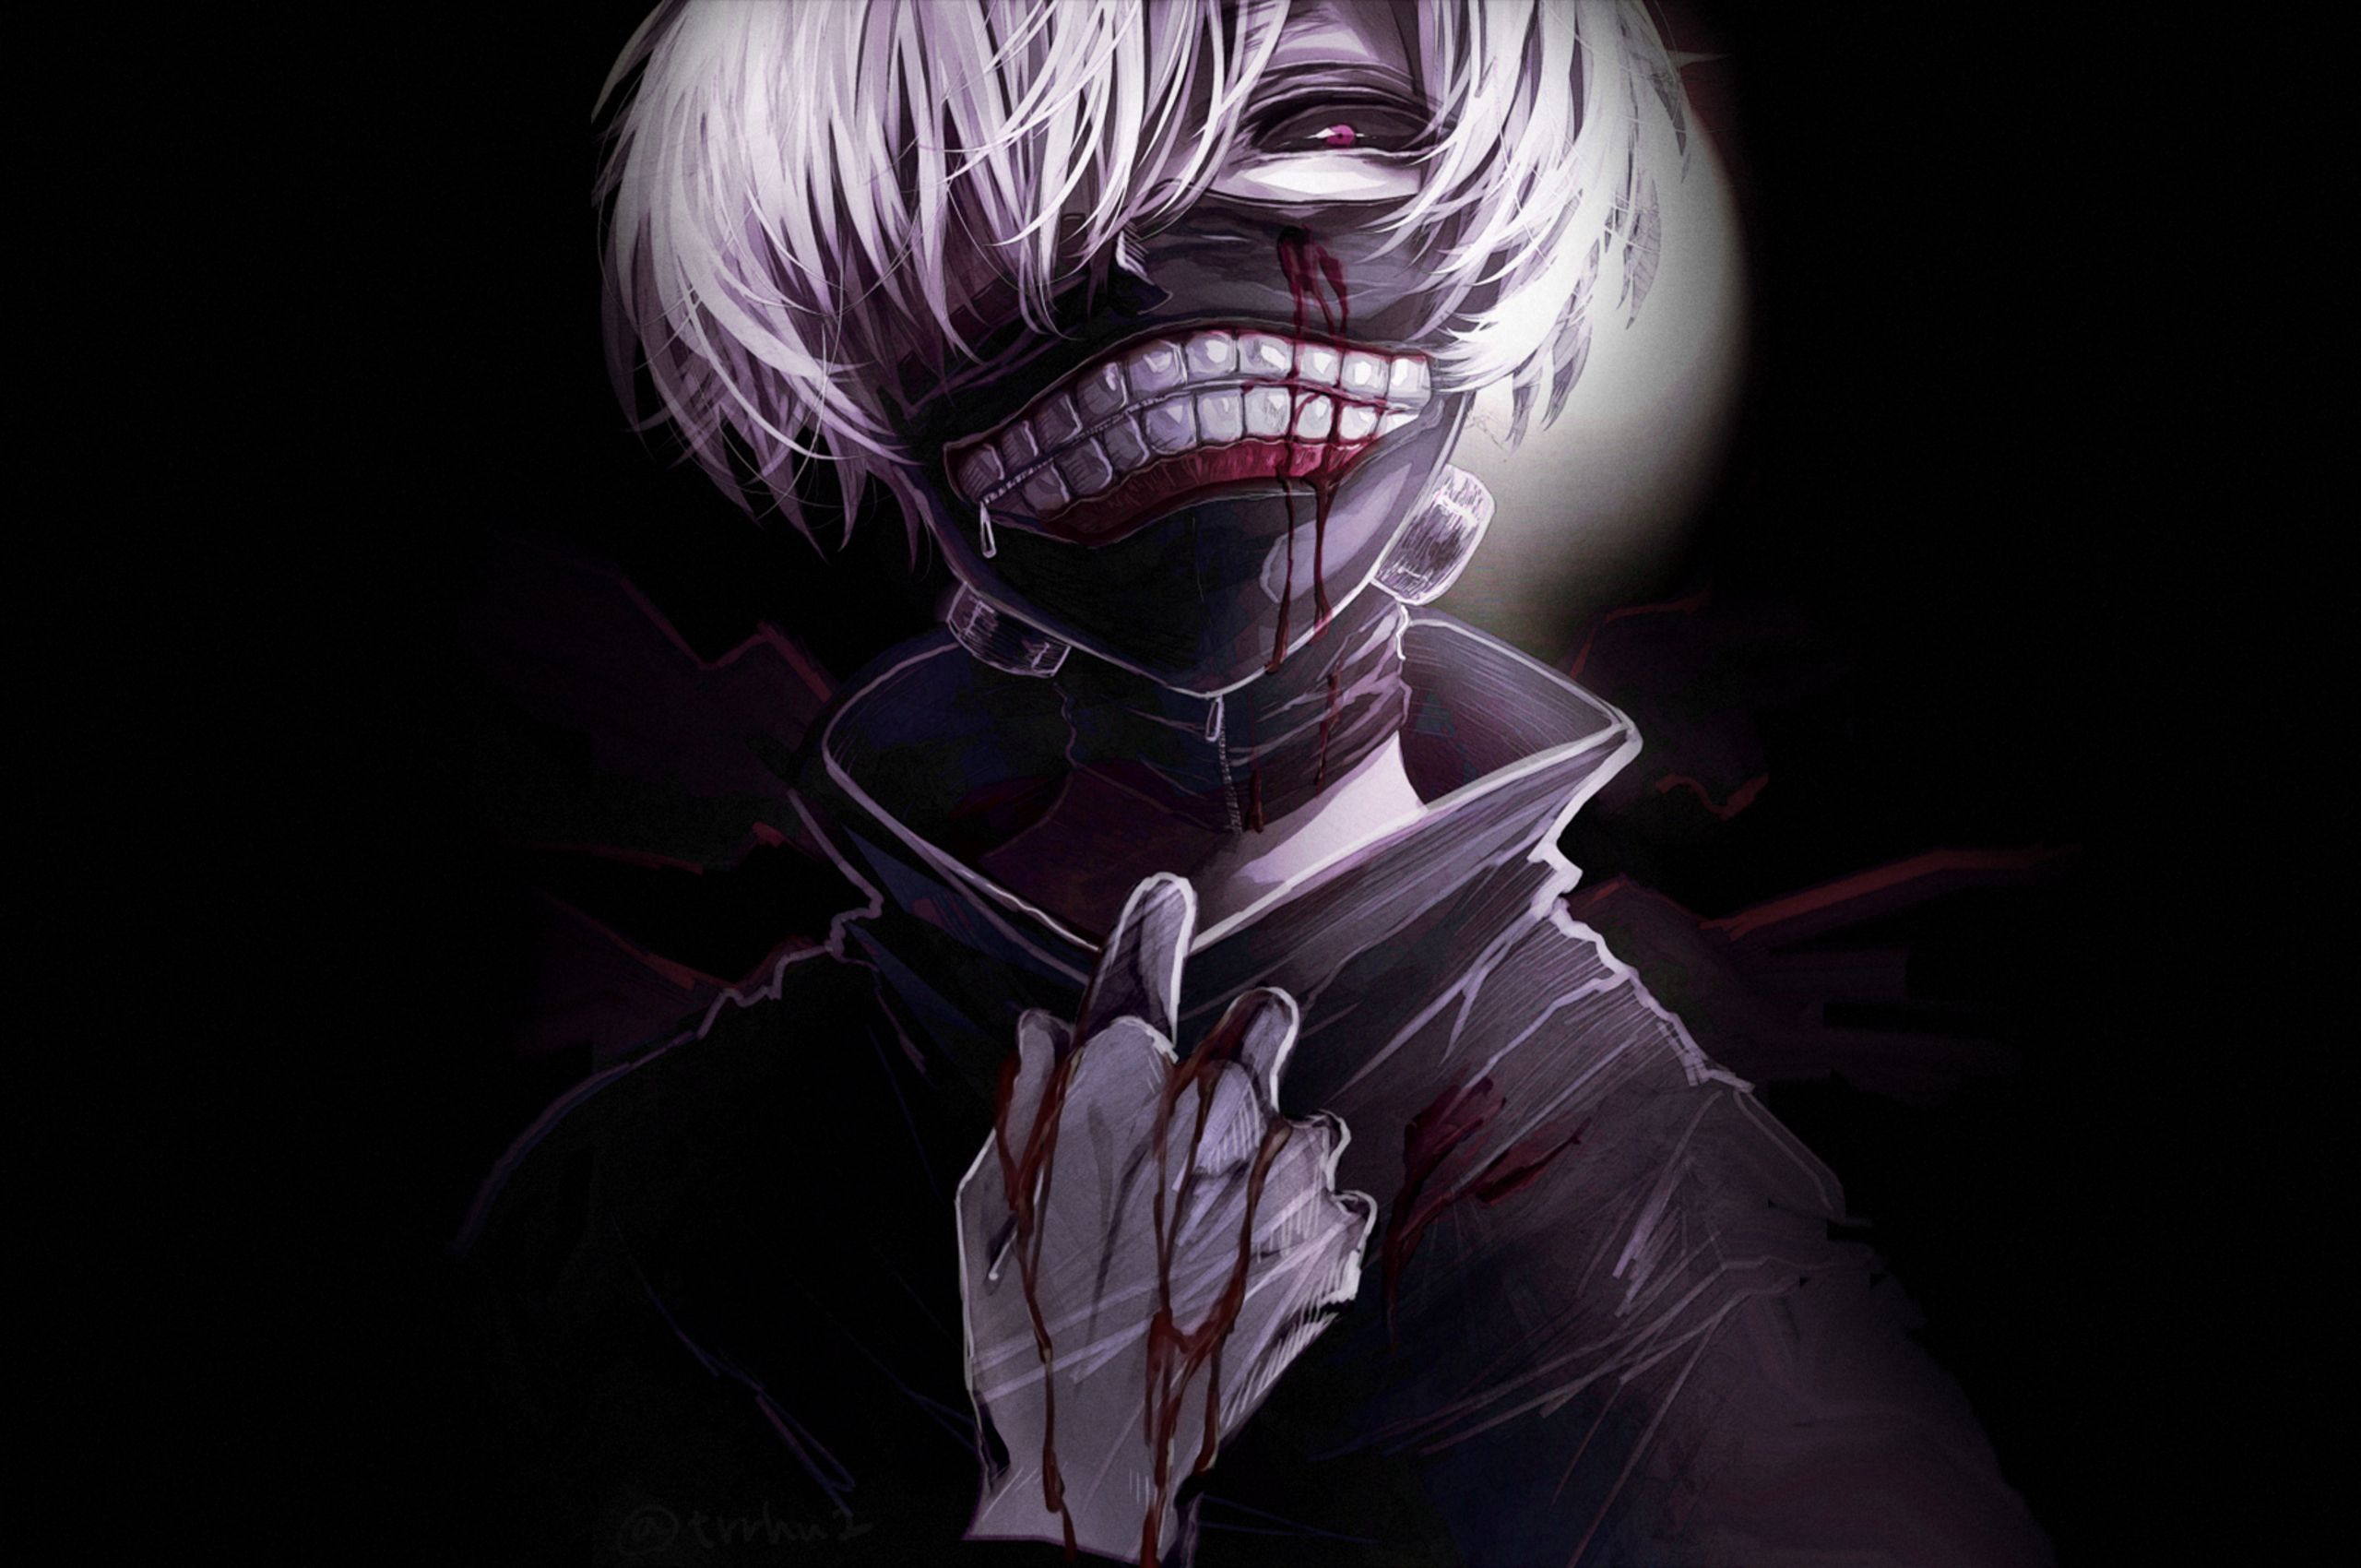 Tokyo Ghoul anime wallpaper with a man with white hair and a mask - Tokyo Ghoul